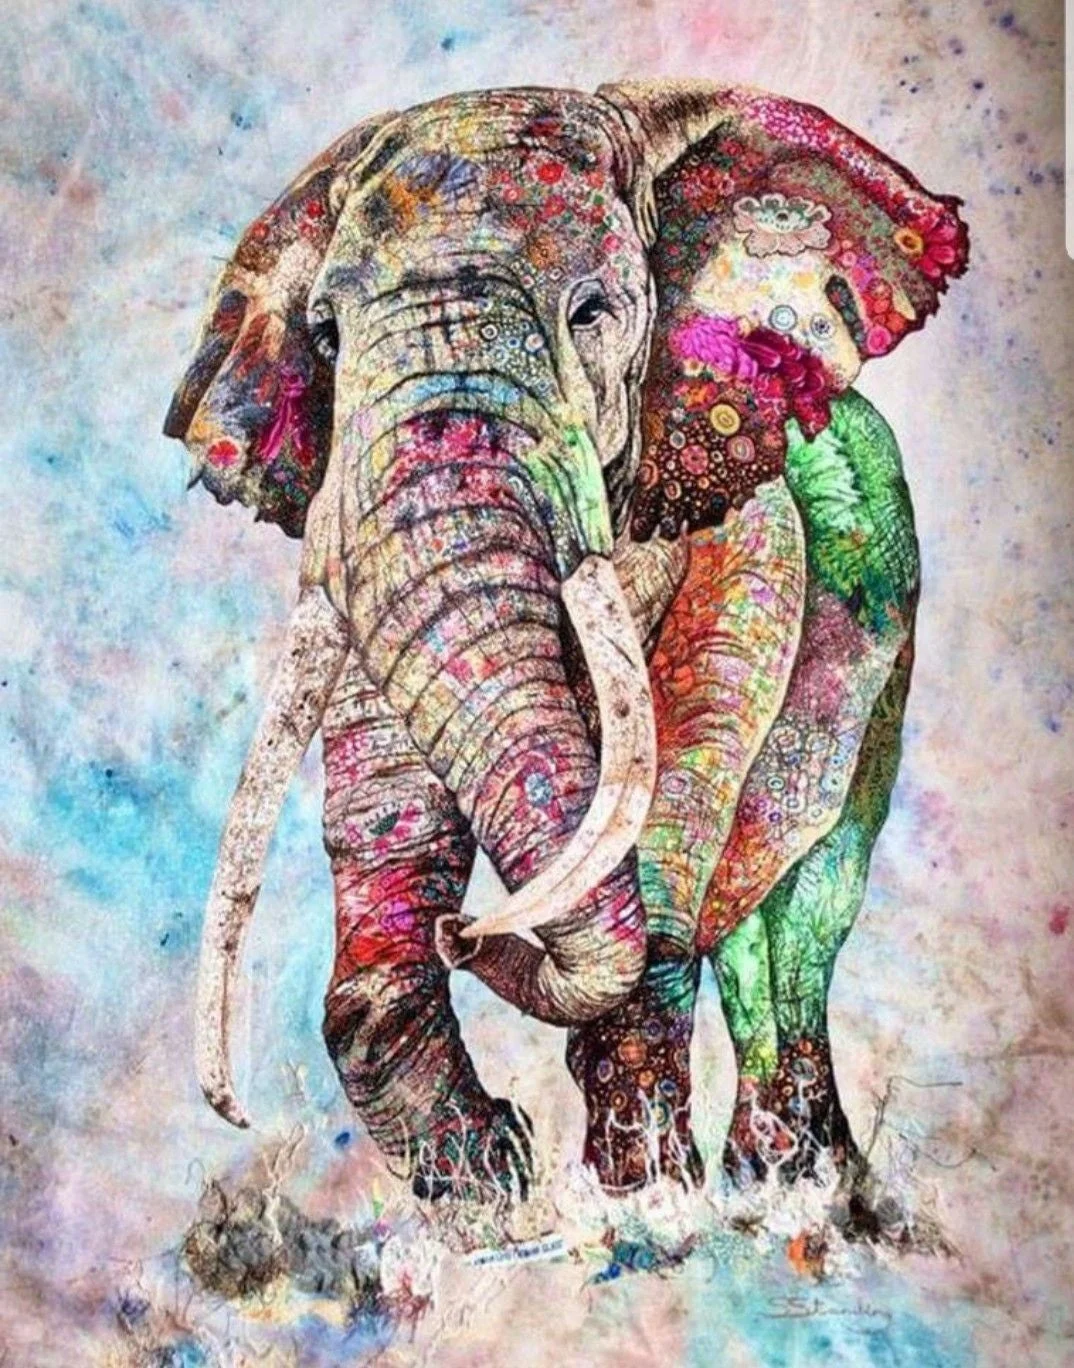 Animal Elephant Paint By Numbers Kits UK For Adult HQD1234